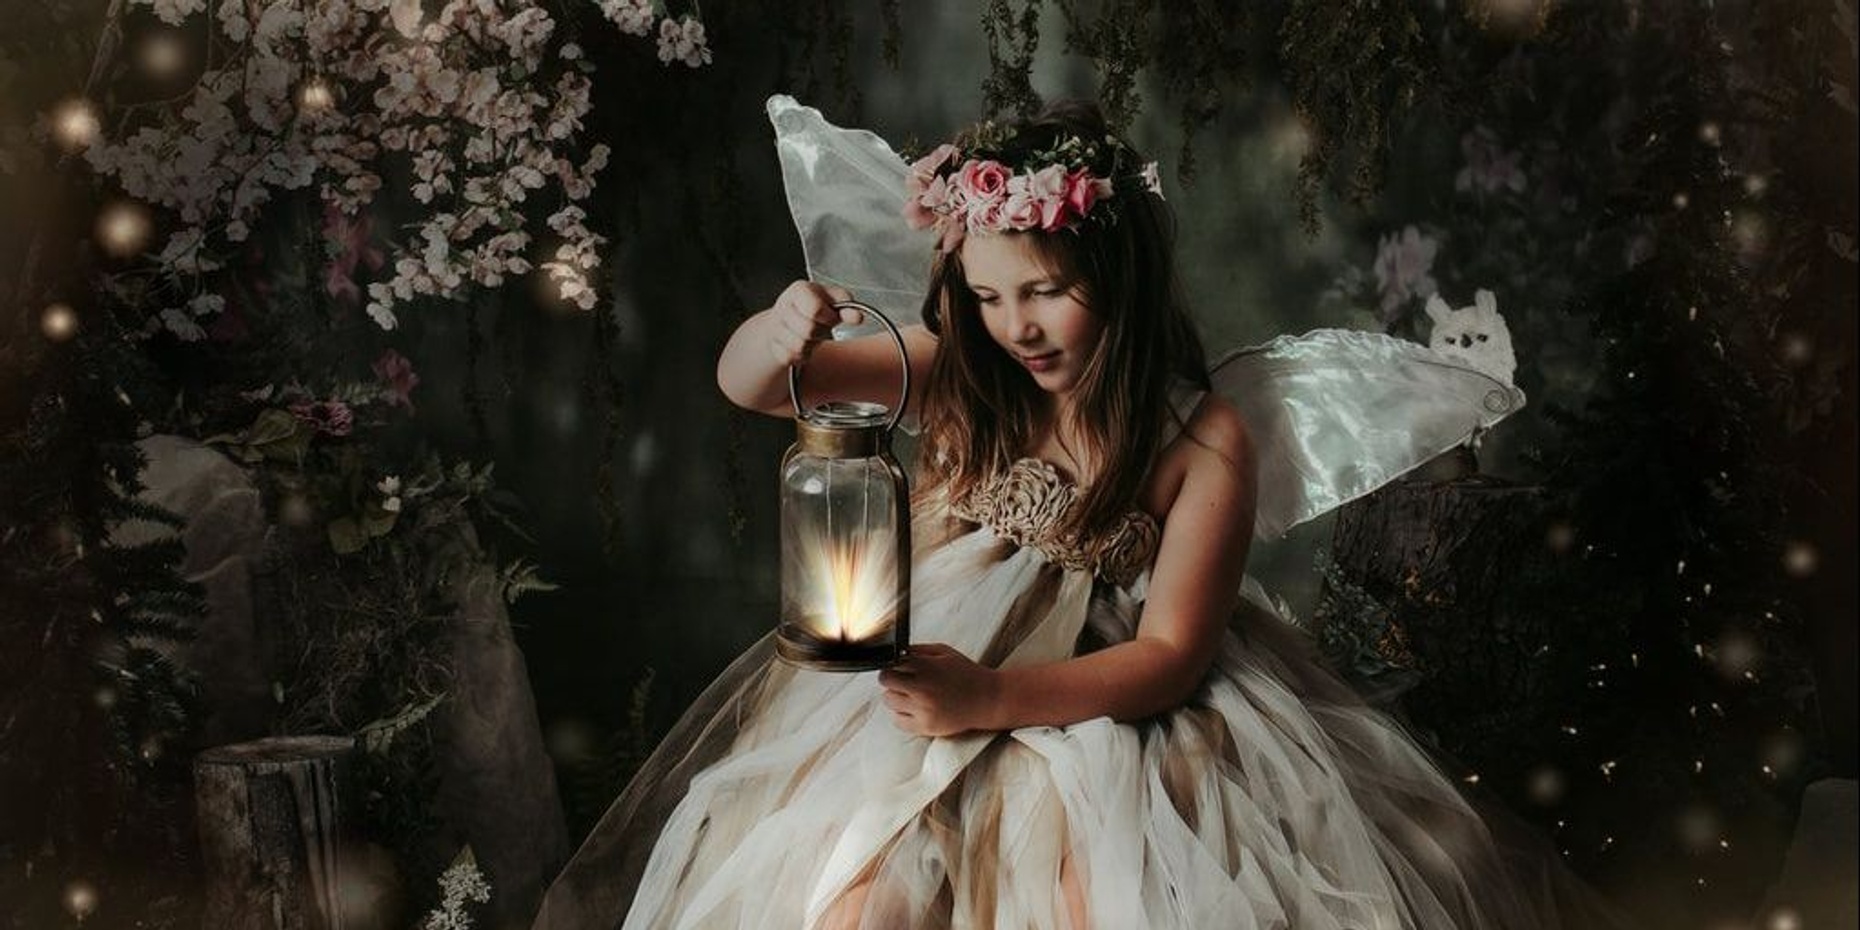 Fairy Day Photo Experience in Madison